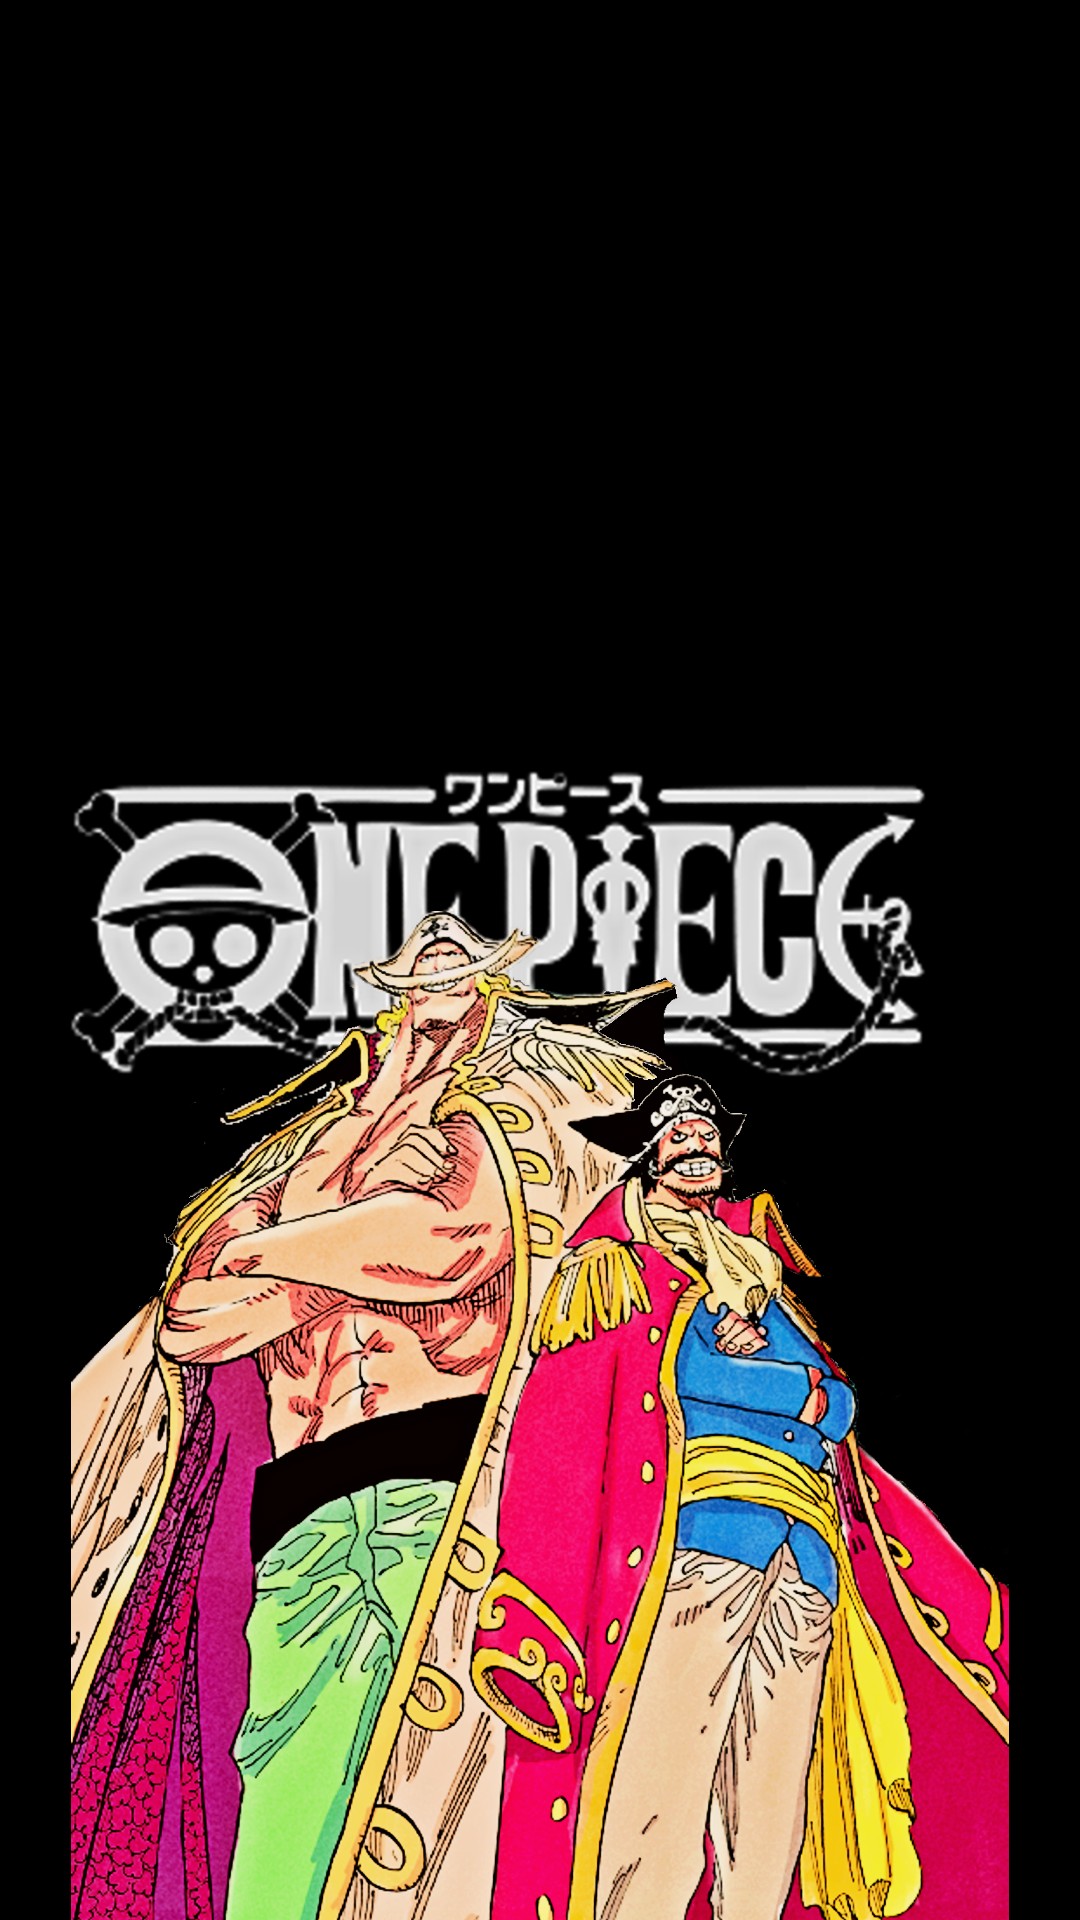 One Piece Wallpaper Dark Theme! Roger and WhiteBeard the best pirates ( Whitebeard is my fav who is yours? I will make a wallpaper if it's good)